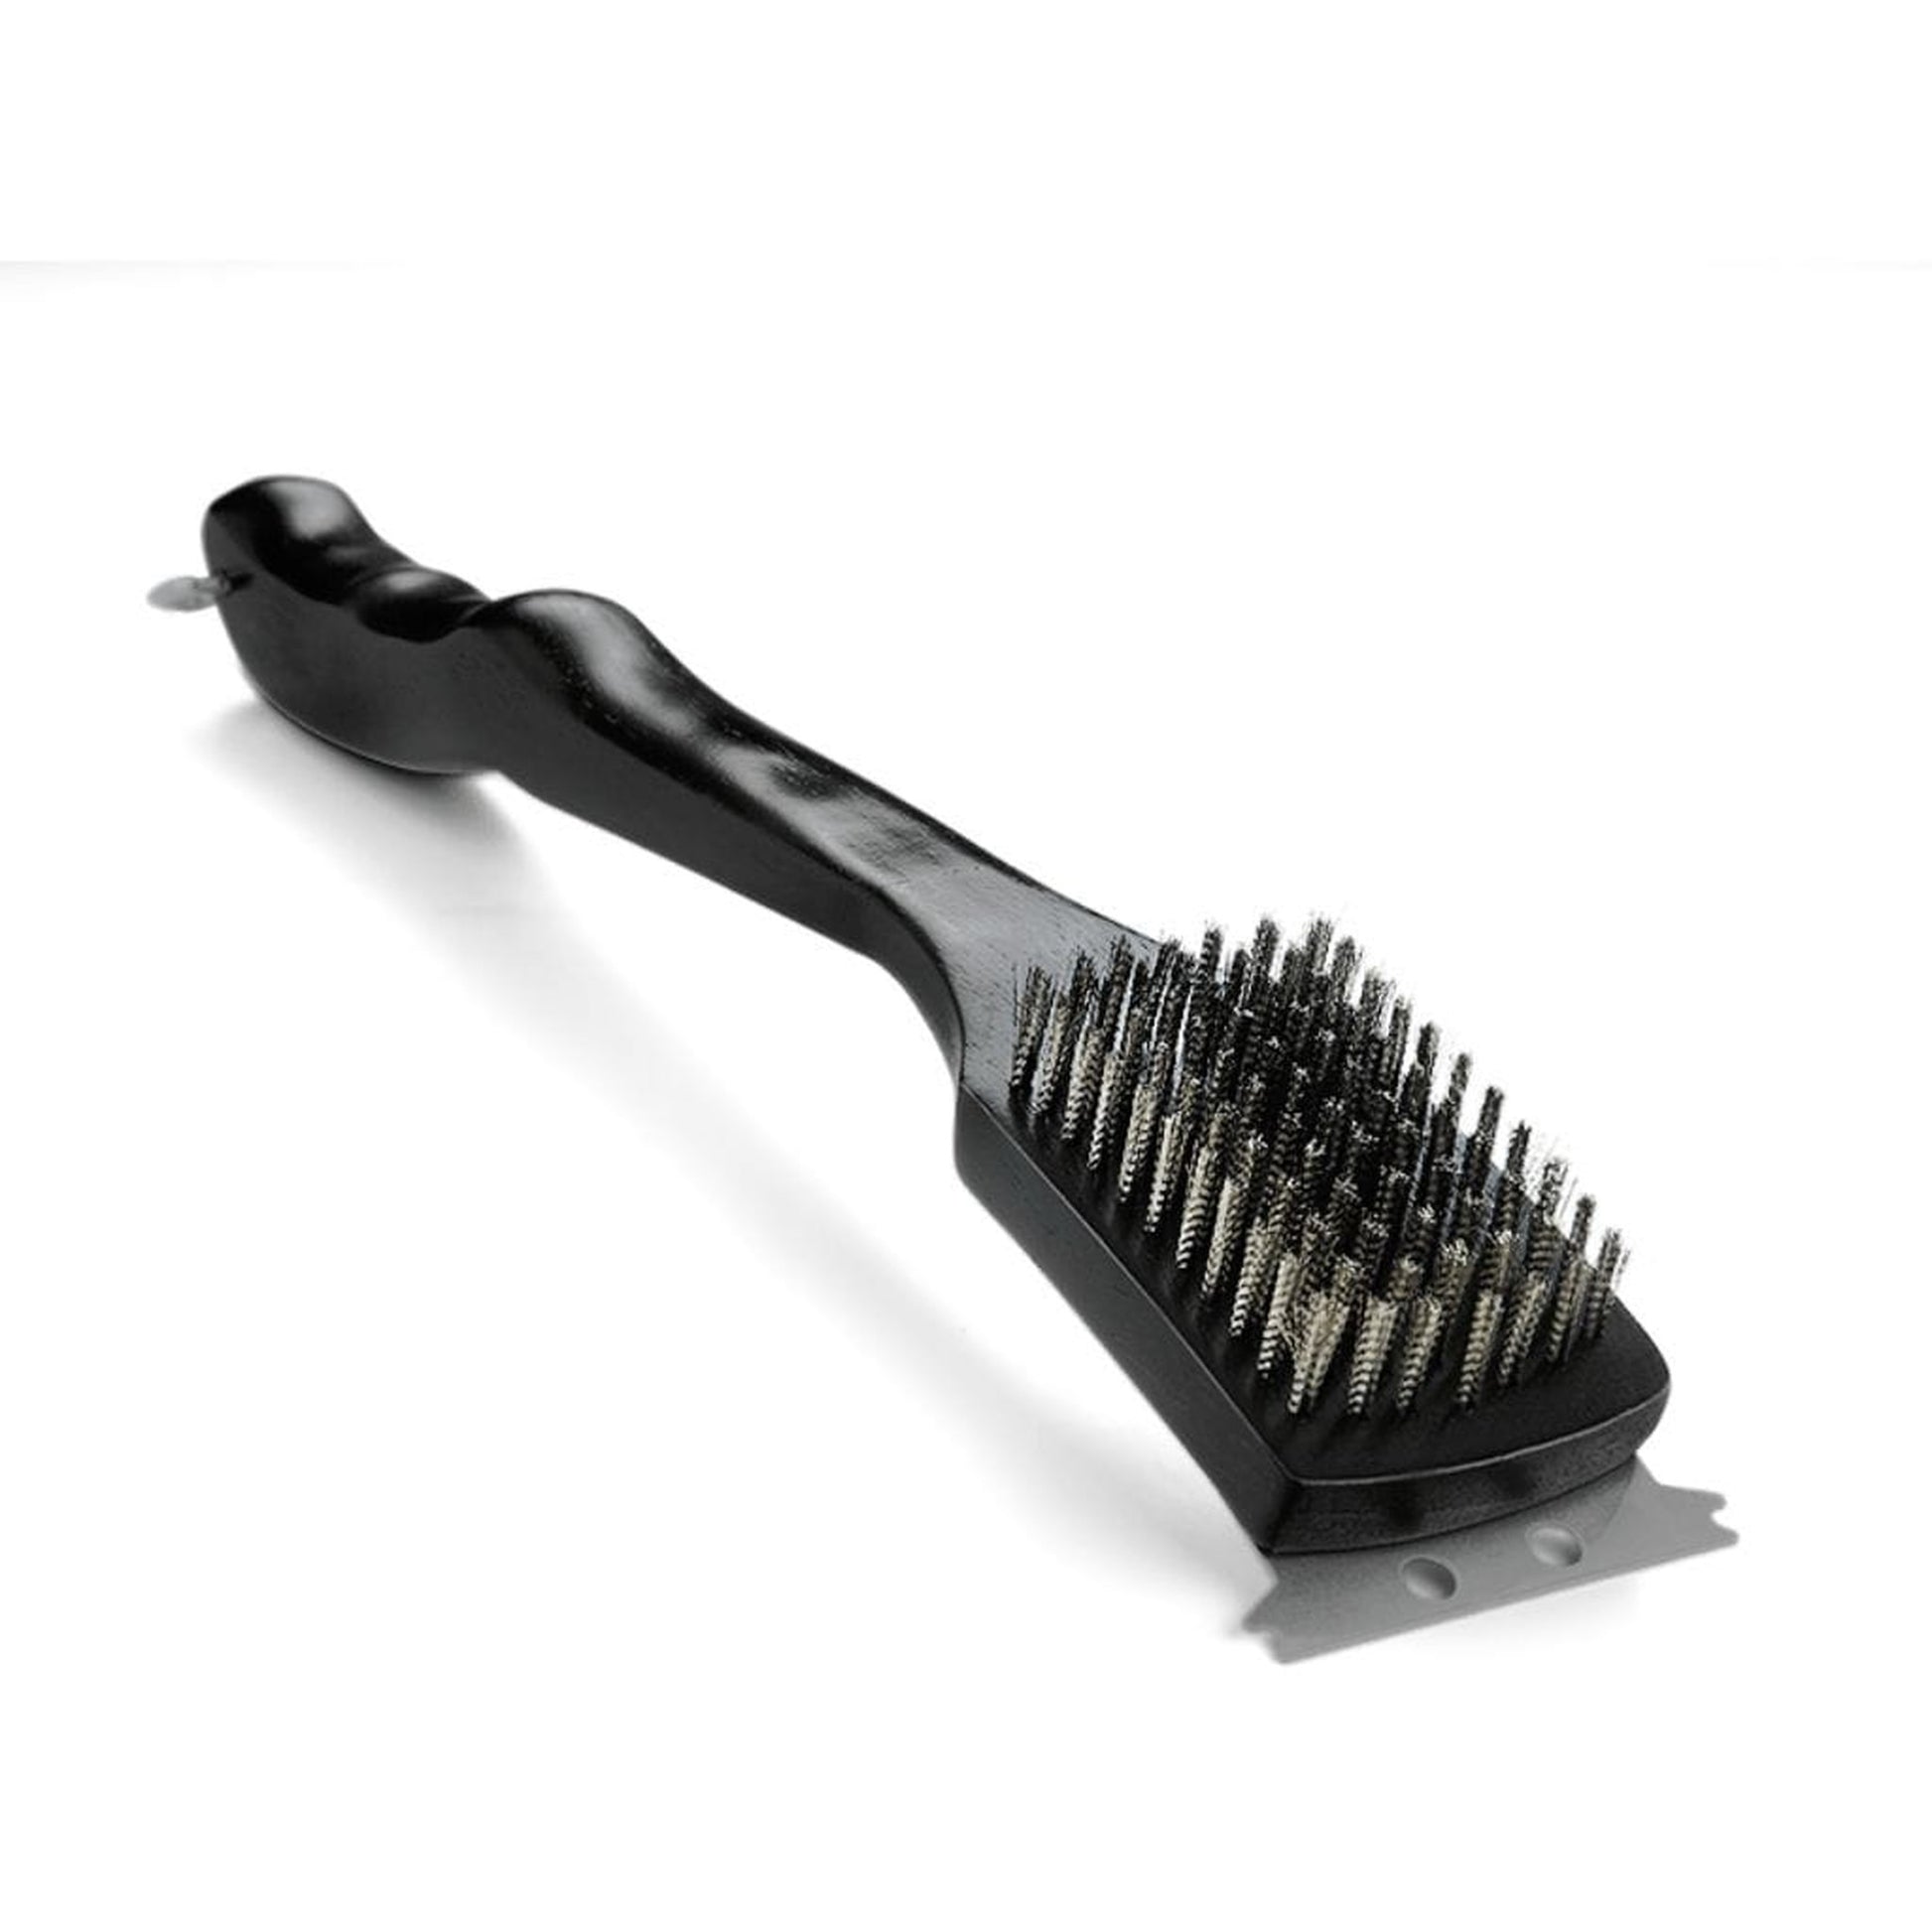 Napoleon 62118/62028 Grill Brush with Stainless Steel/Brass Bristles